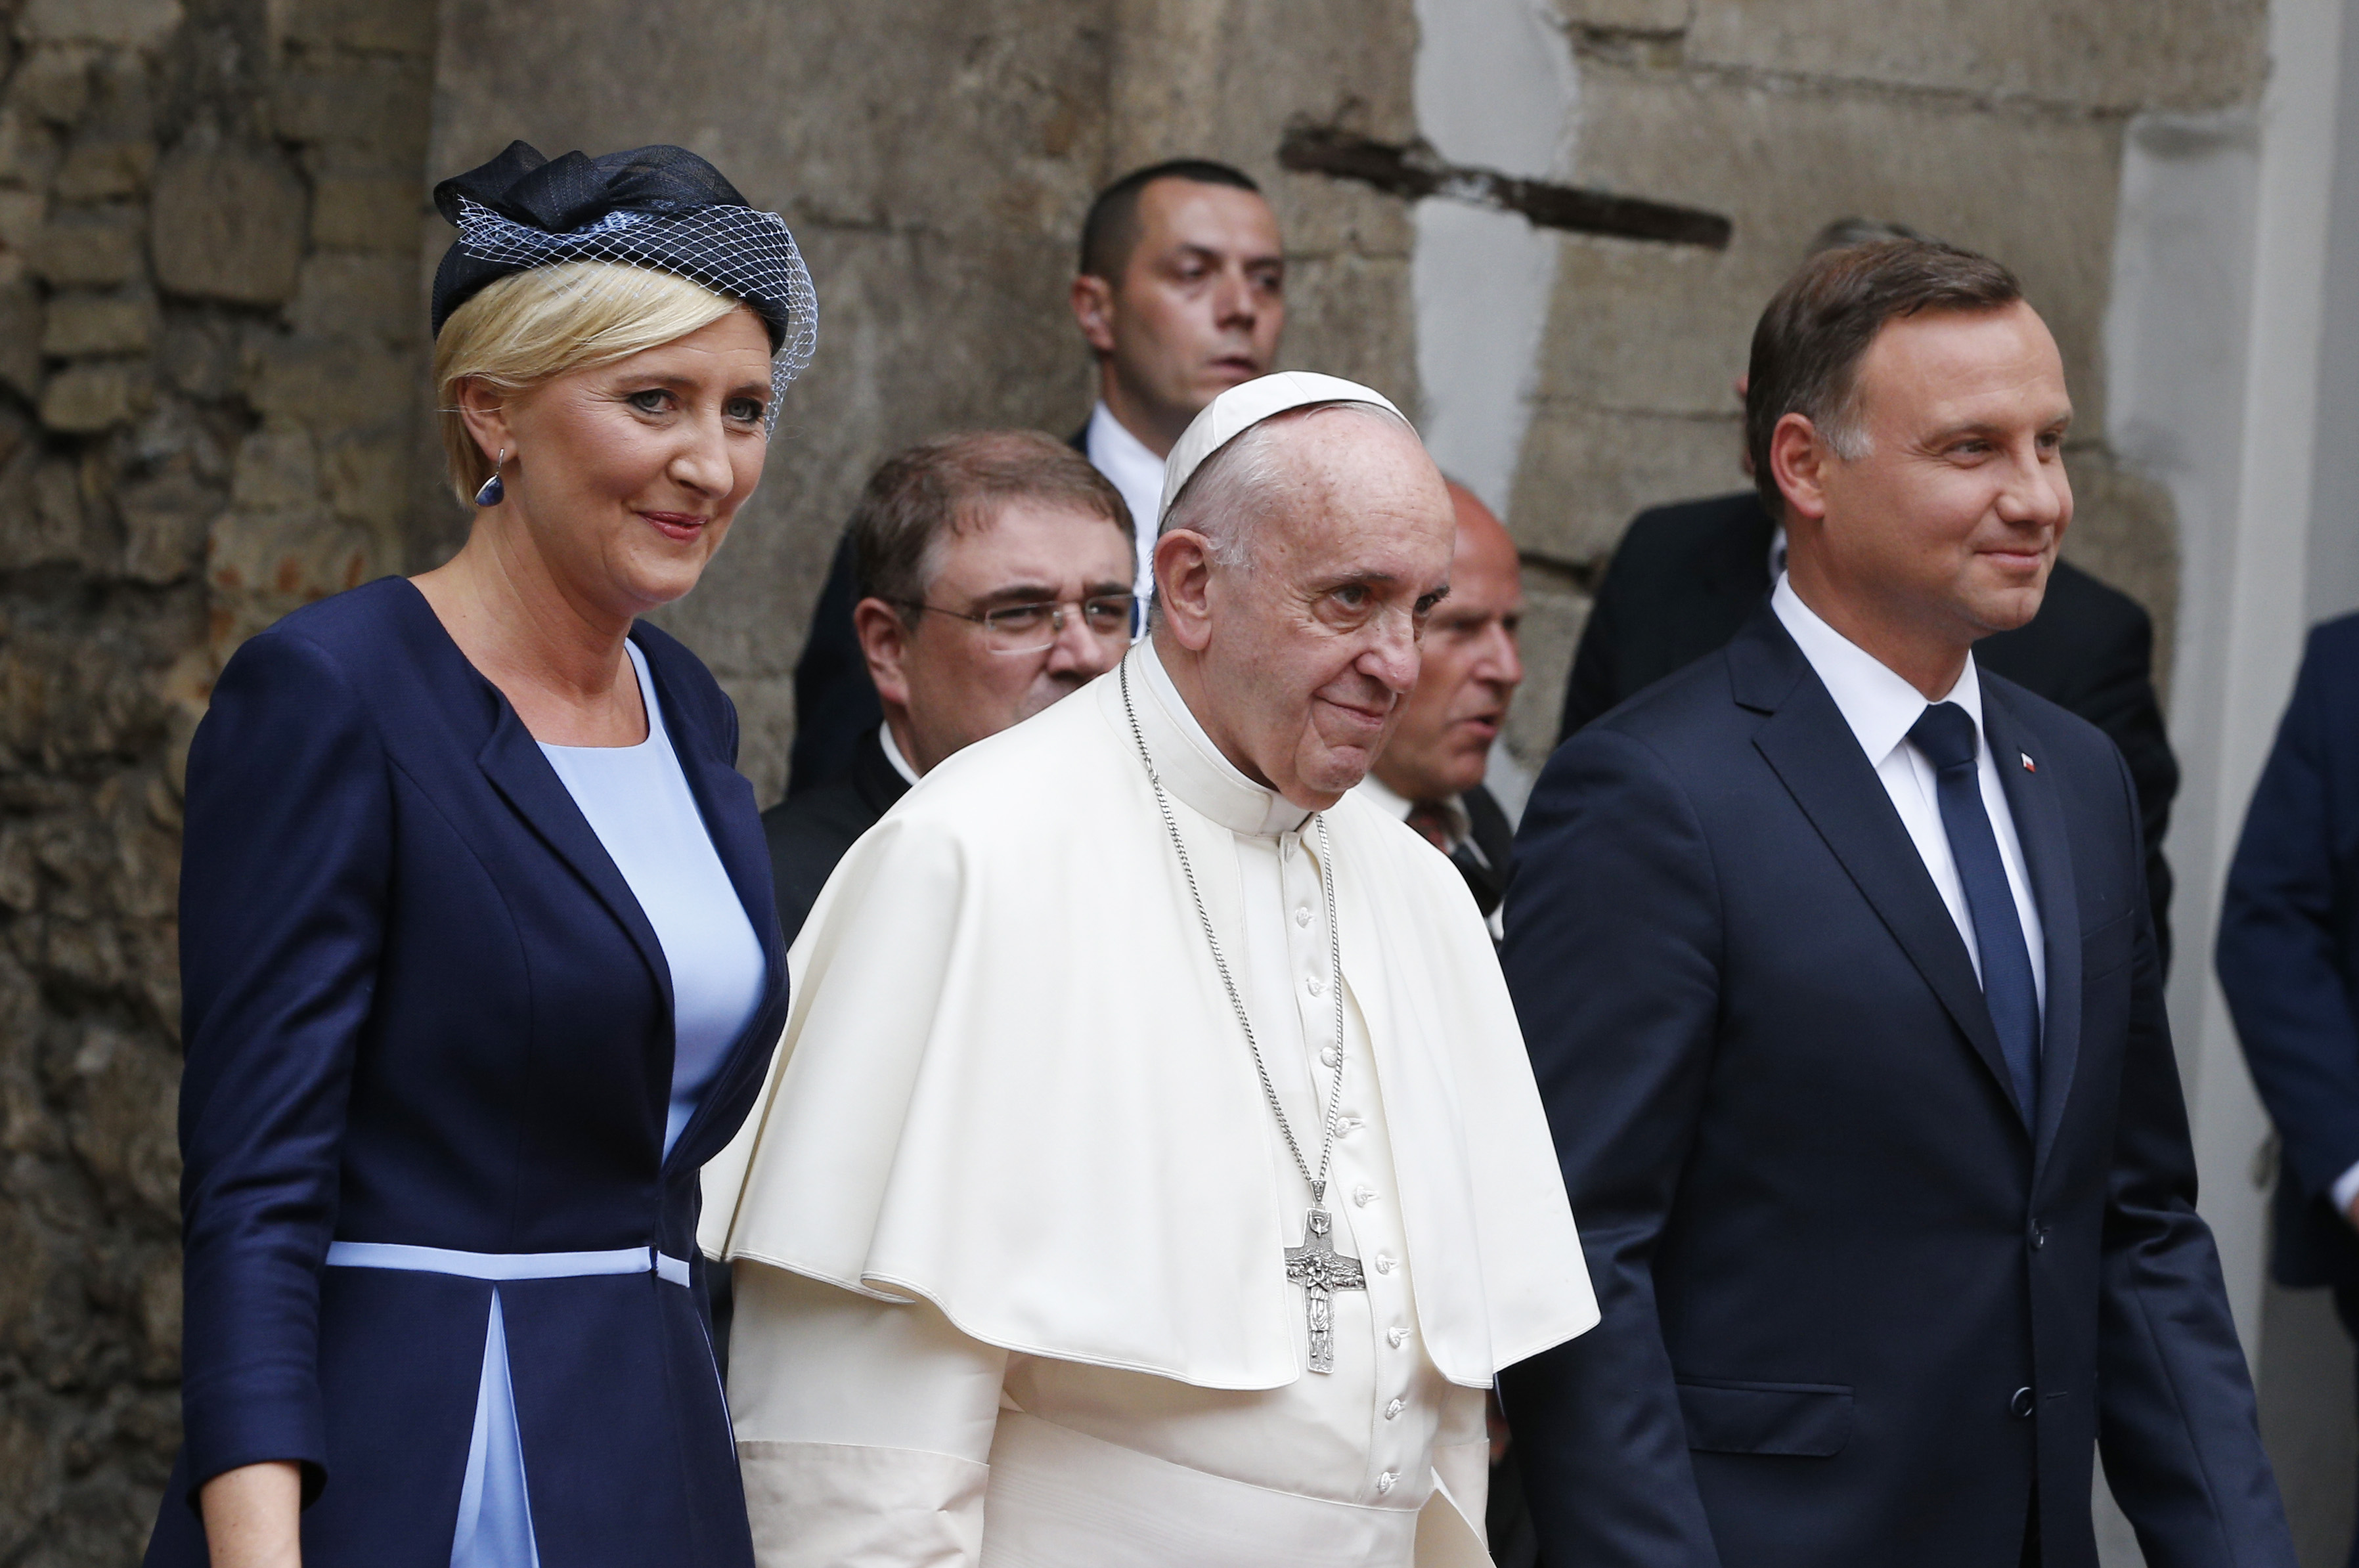 Pope Francis and President Duda